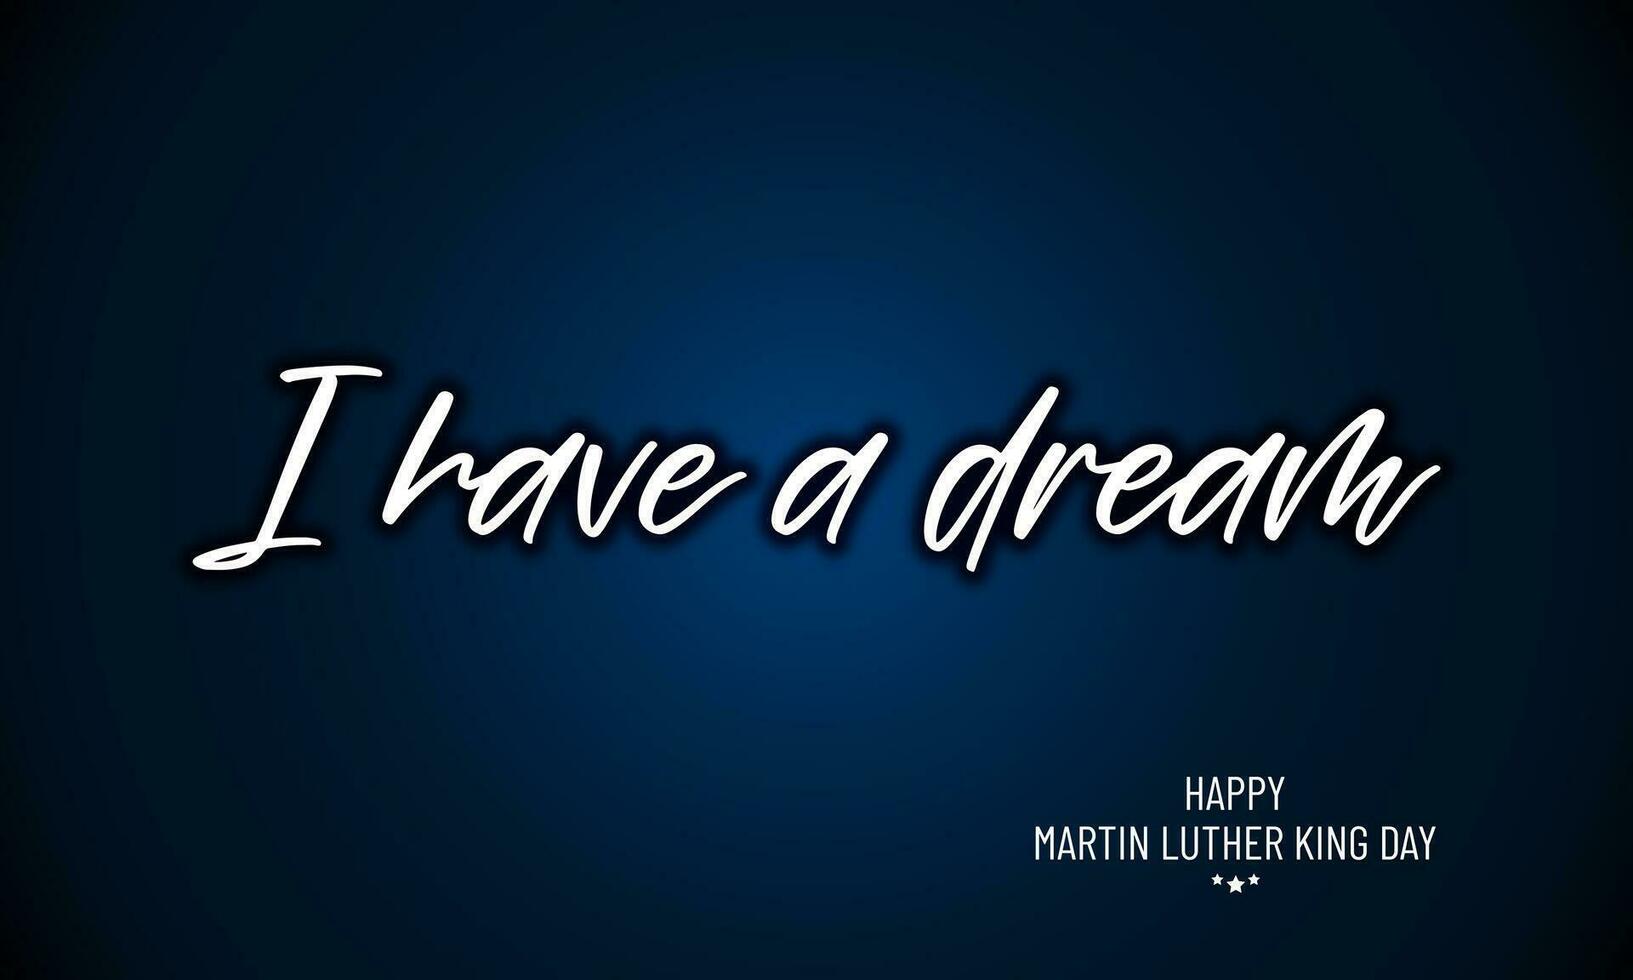 Happy Martin Luther King Day with I have a dream text Background Vector Illustration